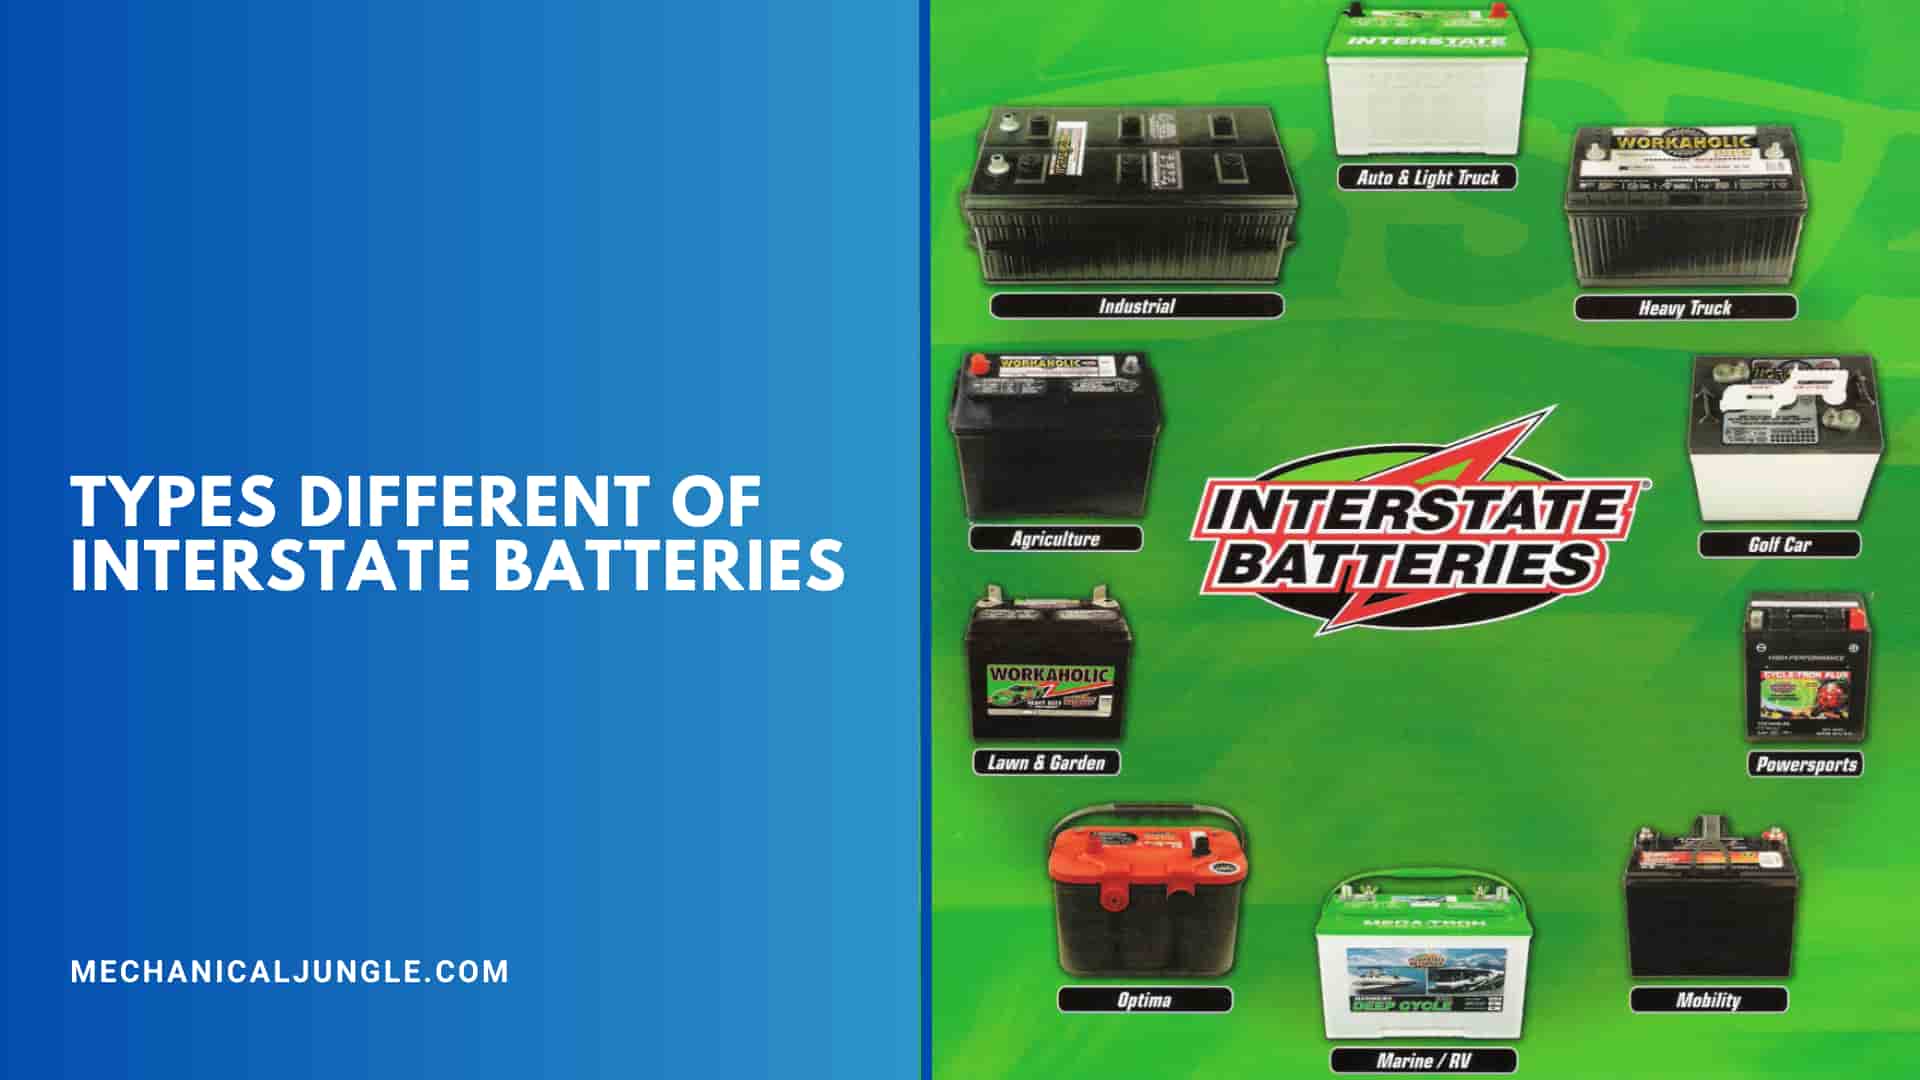 Types Different of Interstate Batteries